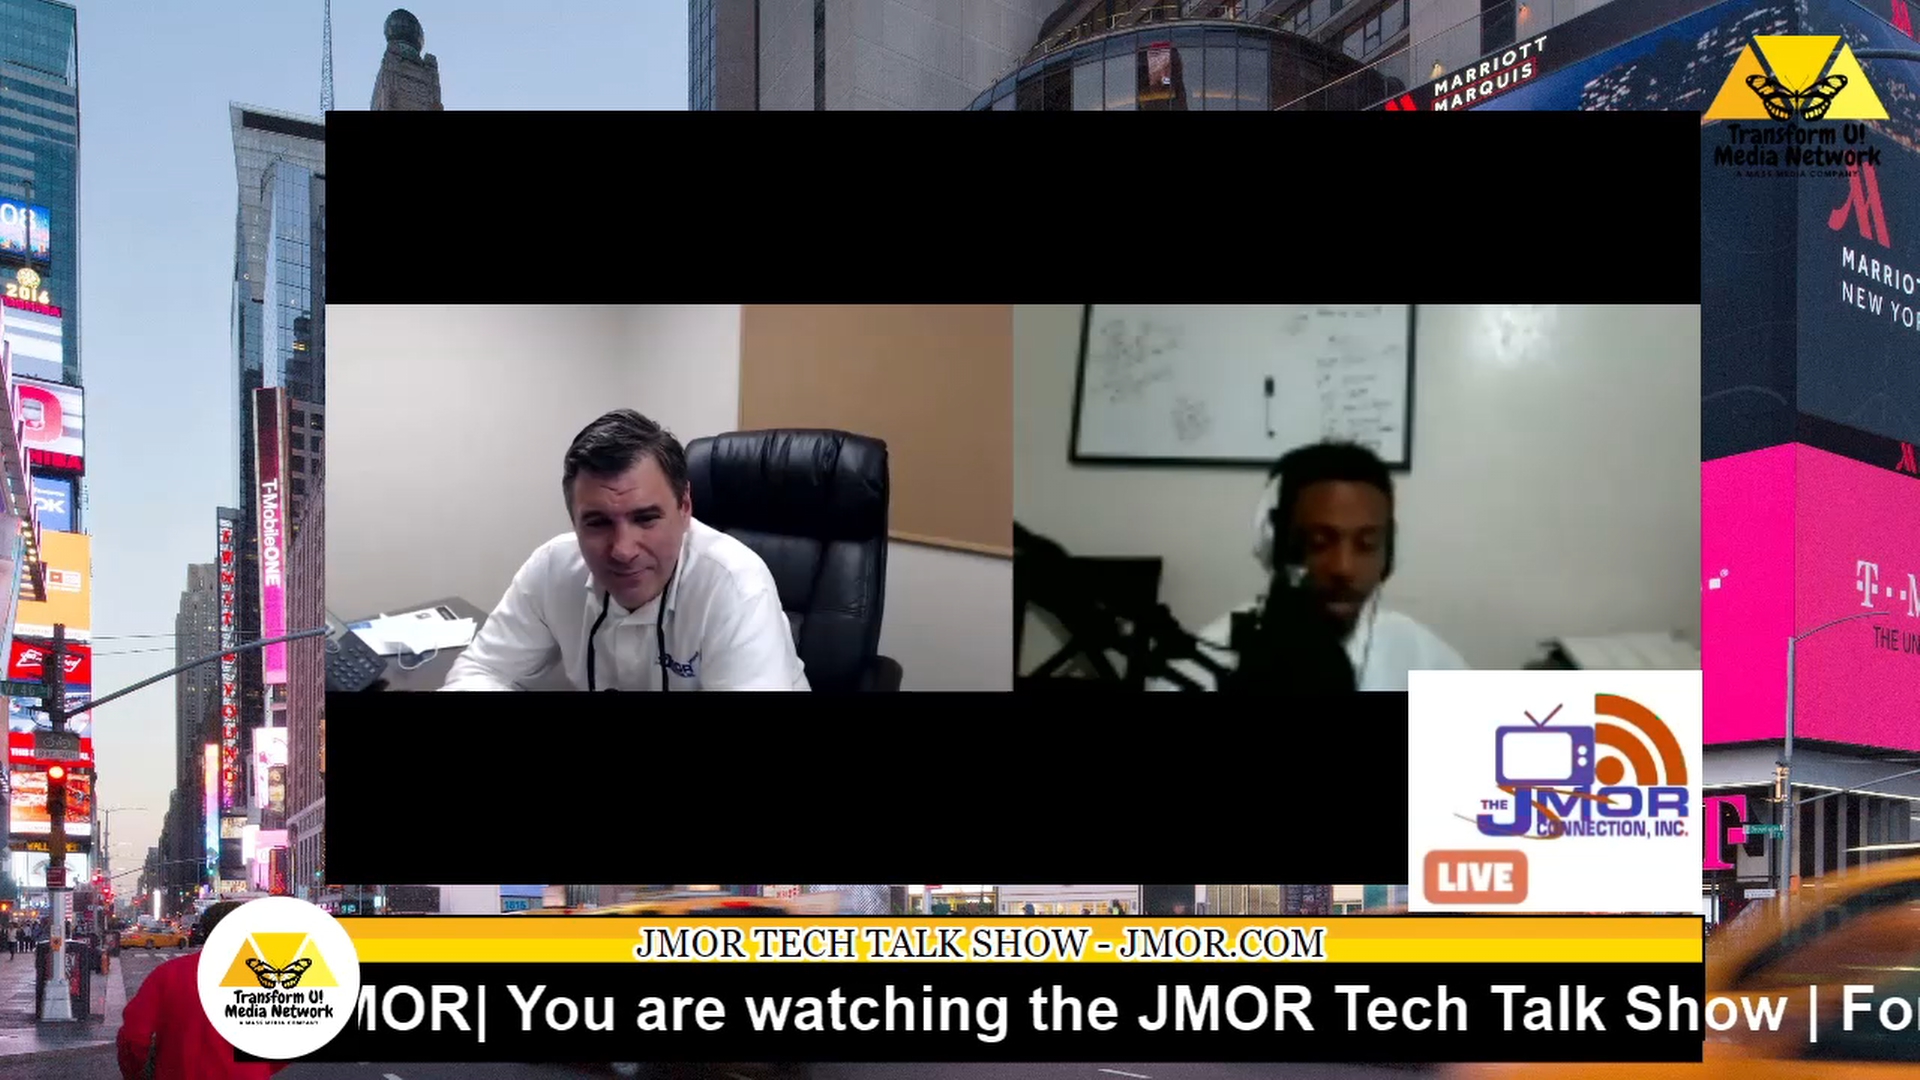 JMOR Tech Talk Show 2020:E12  FB going to pay people for deactivacting their account during the election, Walmart, Amazon, Uber and more